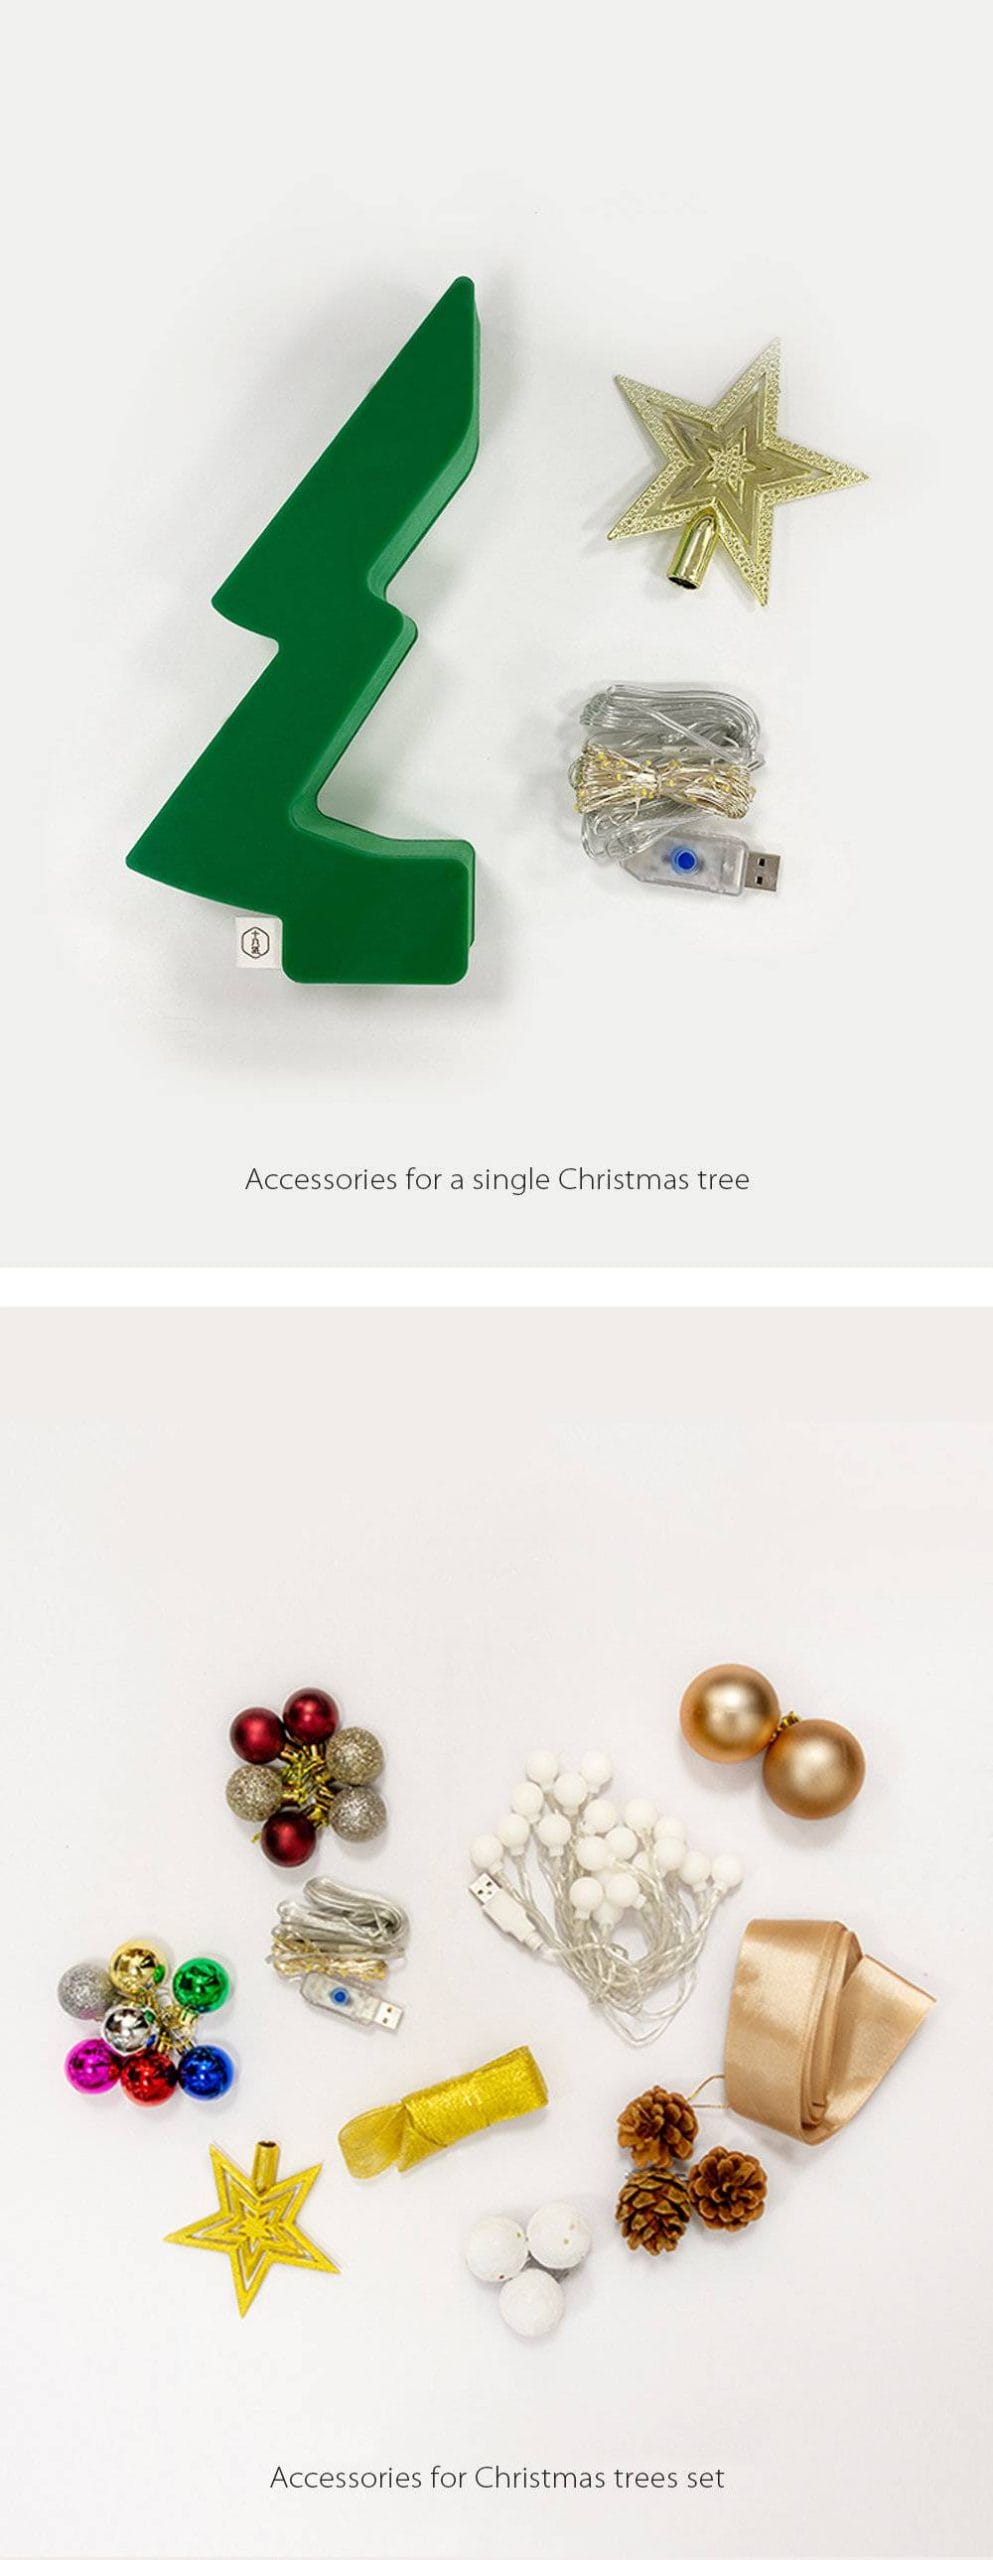 Christmas Tree Ornaments with Star decorative accessories